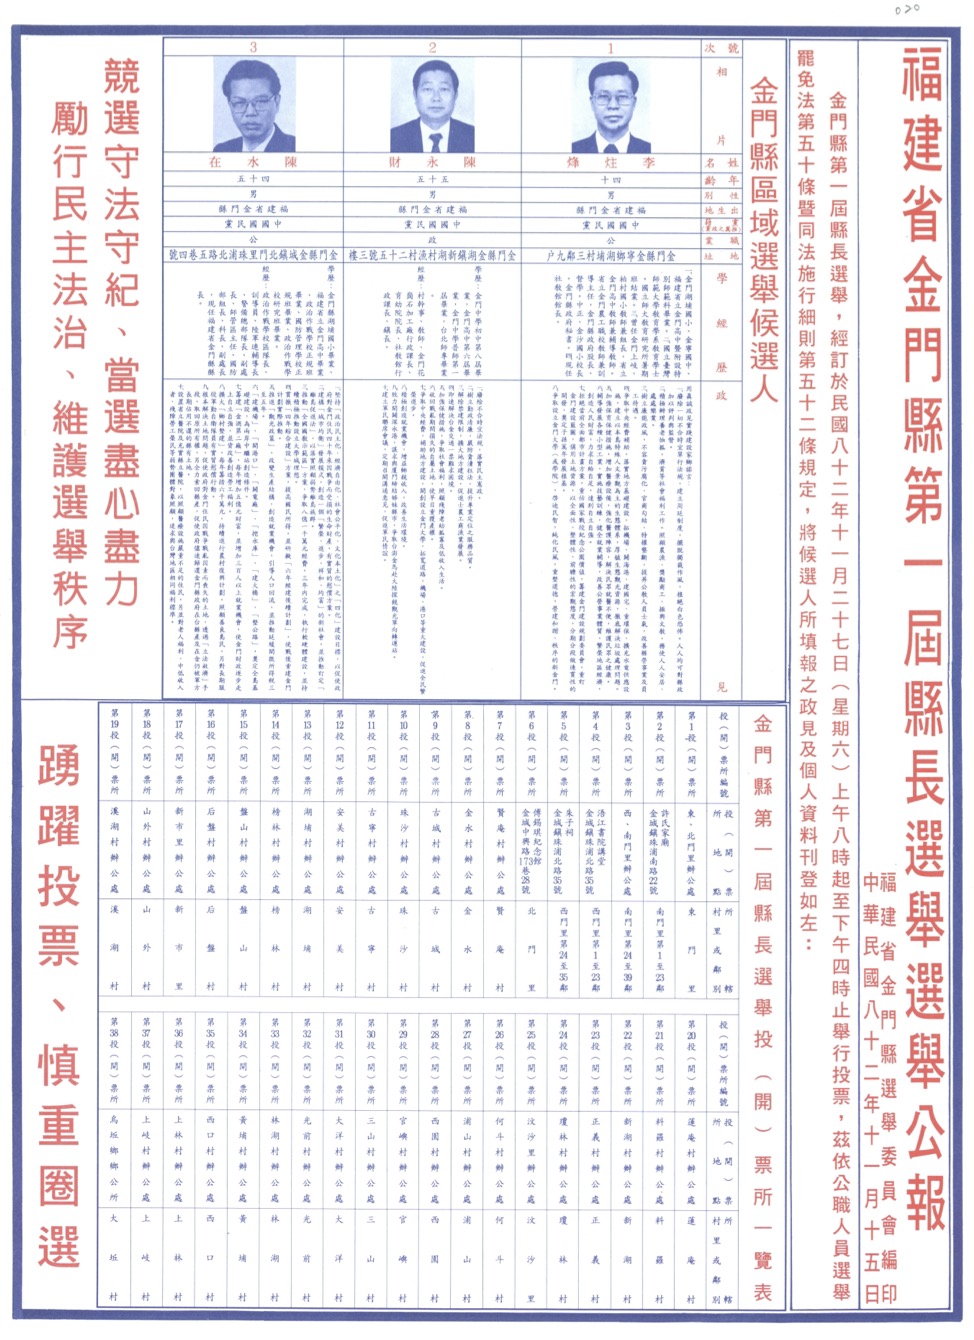 November 1993, the bulletin of the first county magistrate election of Kinmen County, Fujian Province.